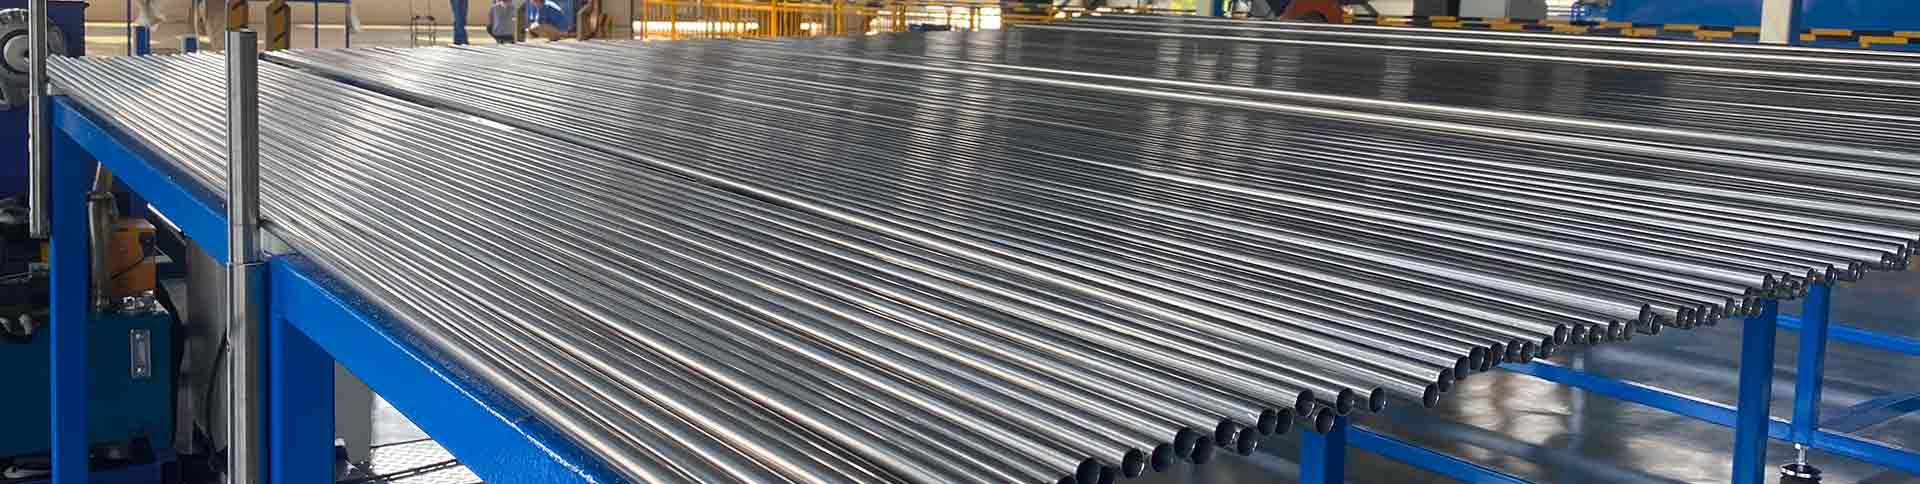 Working Principles and Classifications of Titanium Alloy Tubes